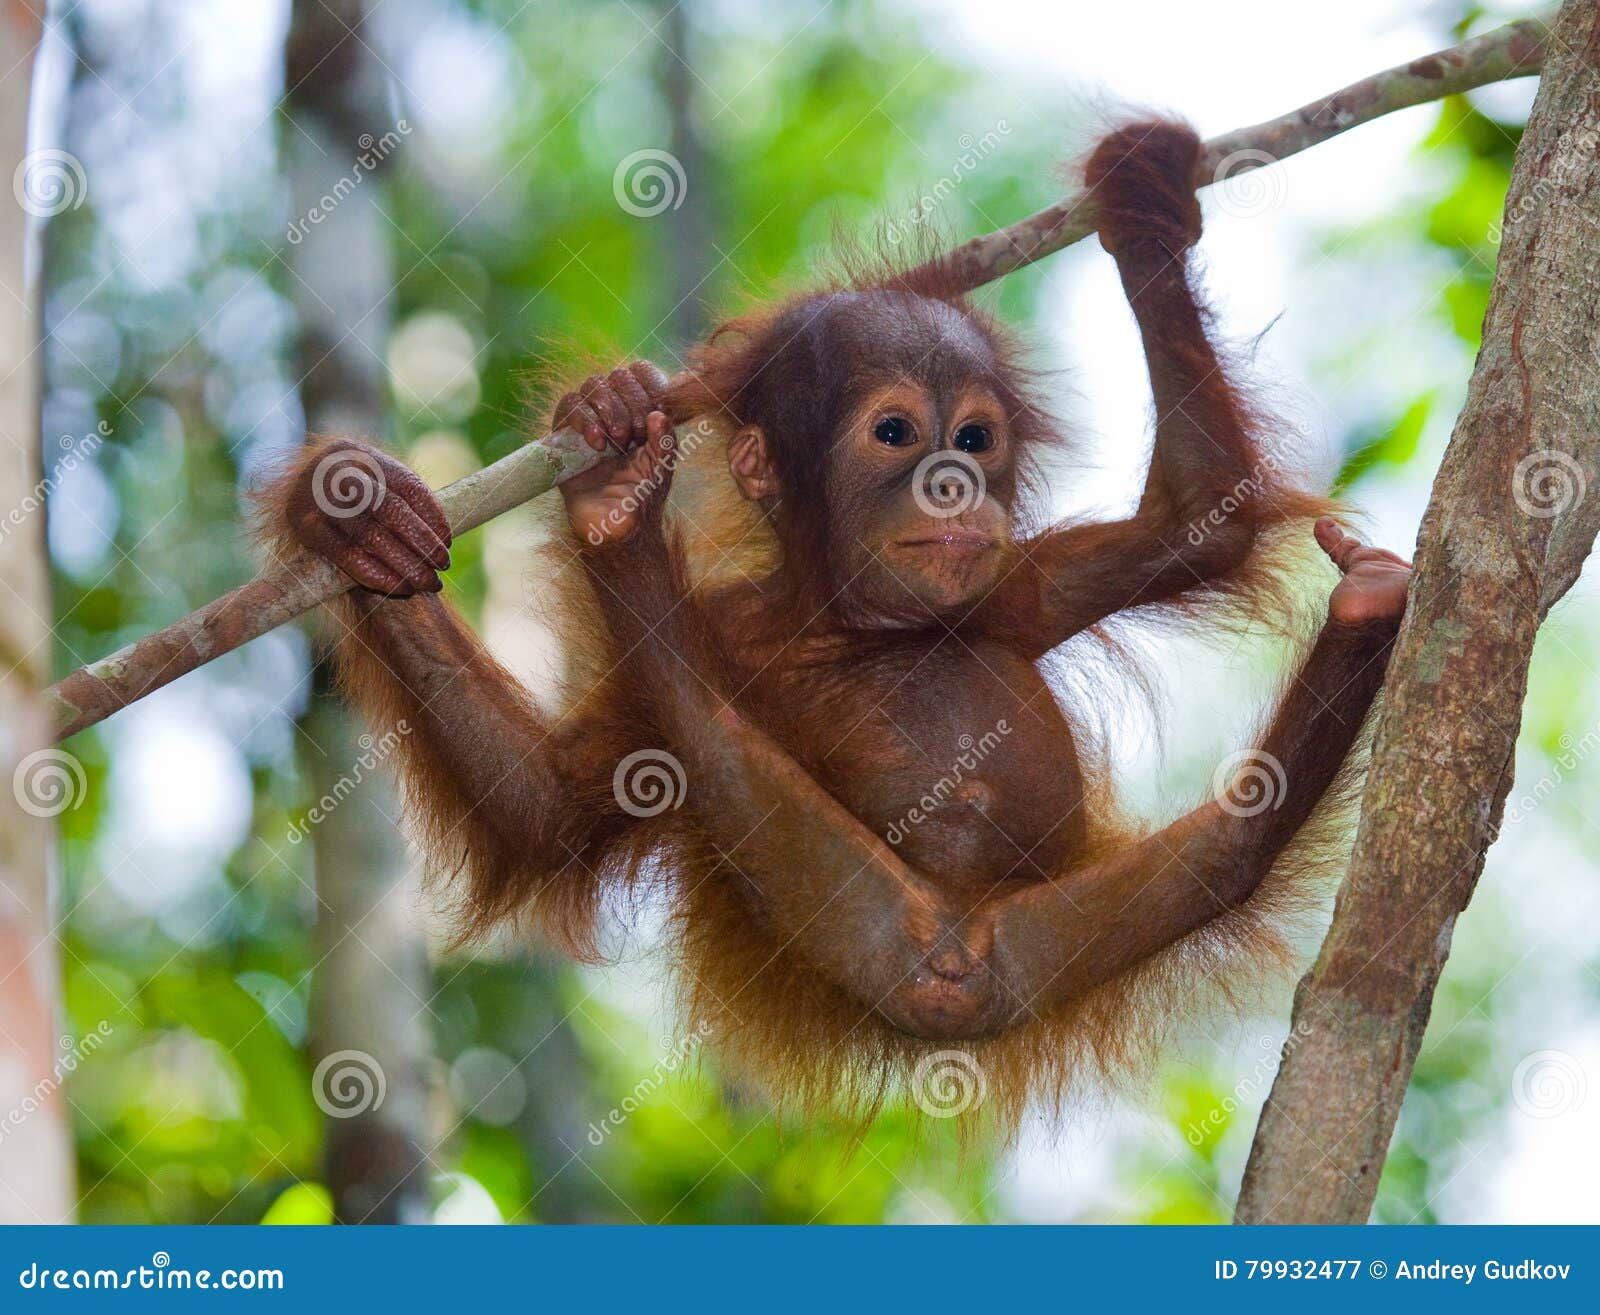 A Baby Orangutan in the Wild. Indonesia. the Island of Kalimantan (Borneo)  Stock Image - Image of hand, front: 79932477